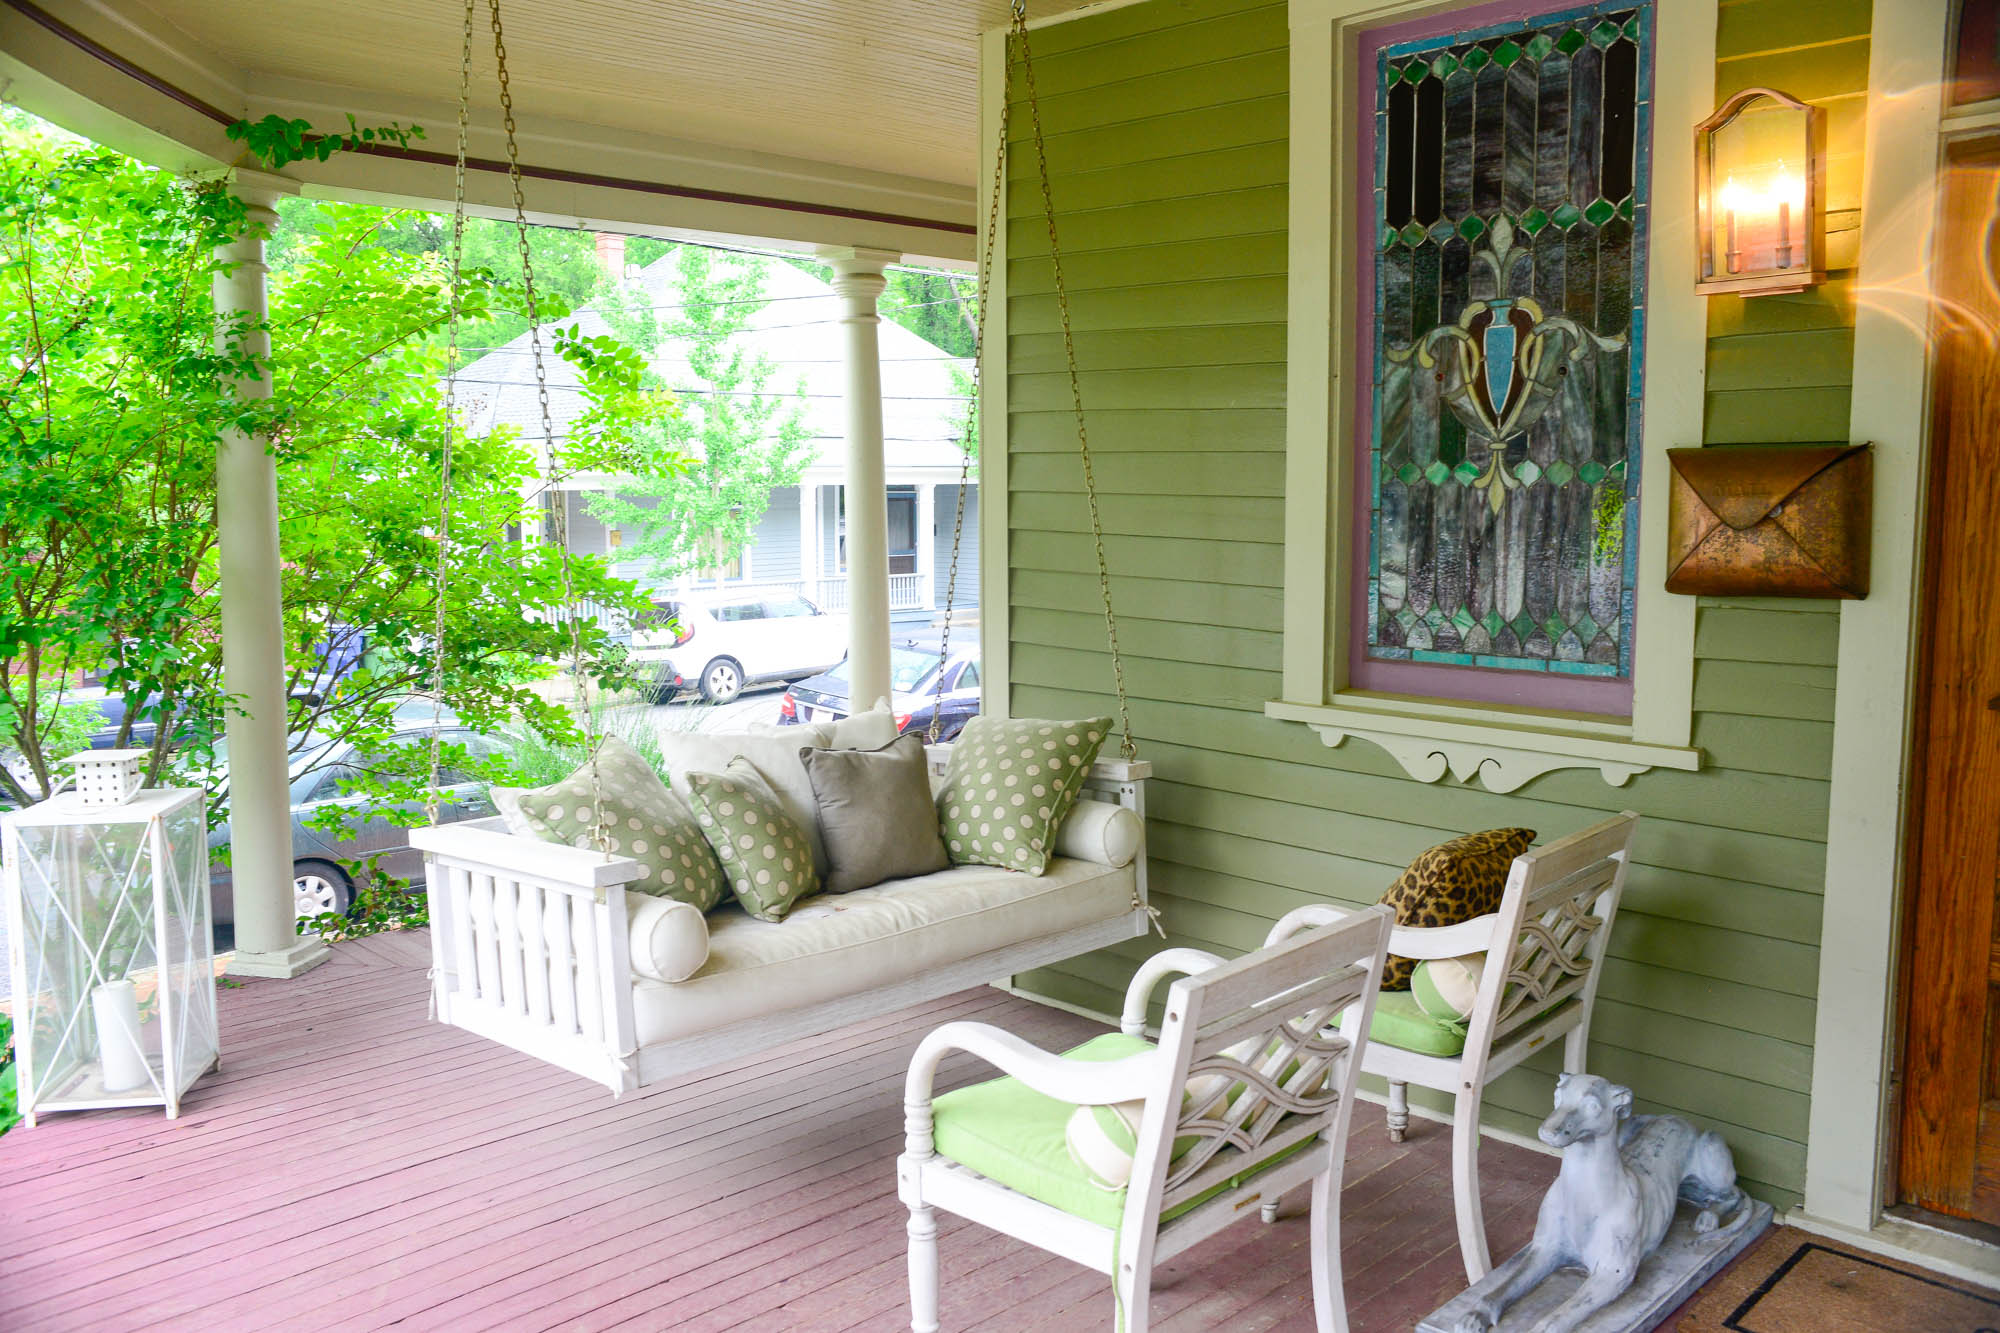 Our dream house must-haves include: a porch, rocking chair…and